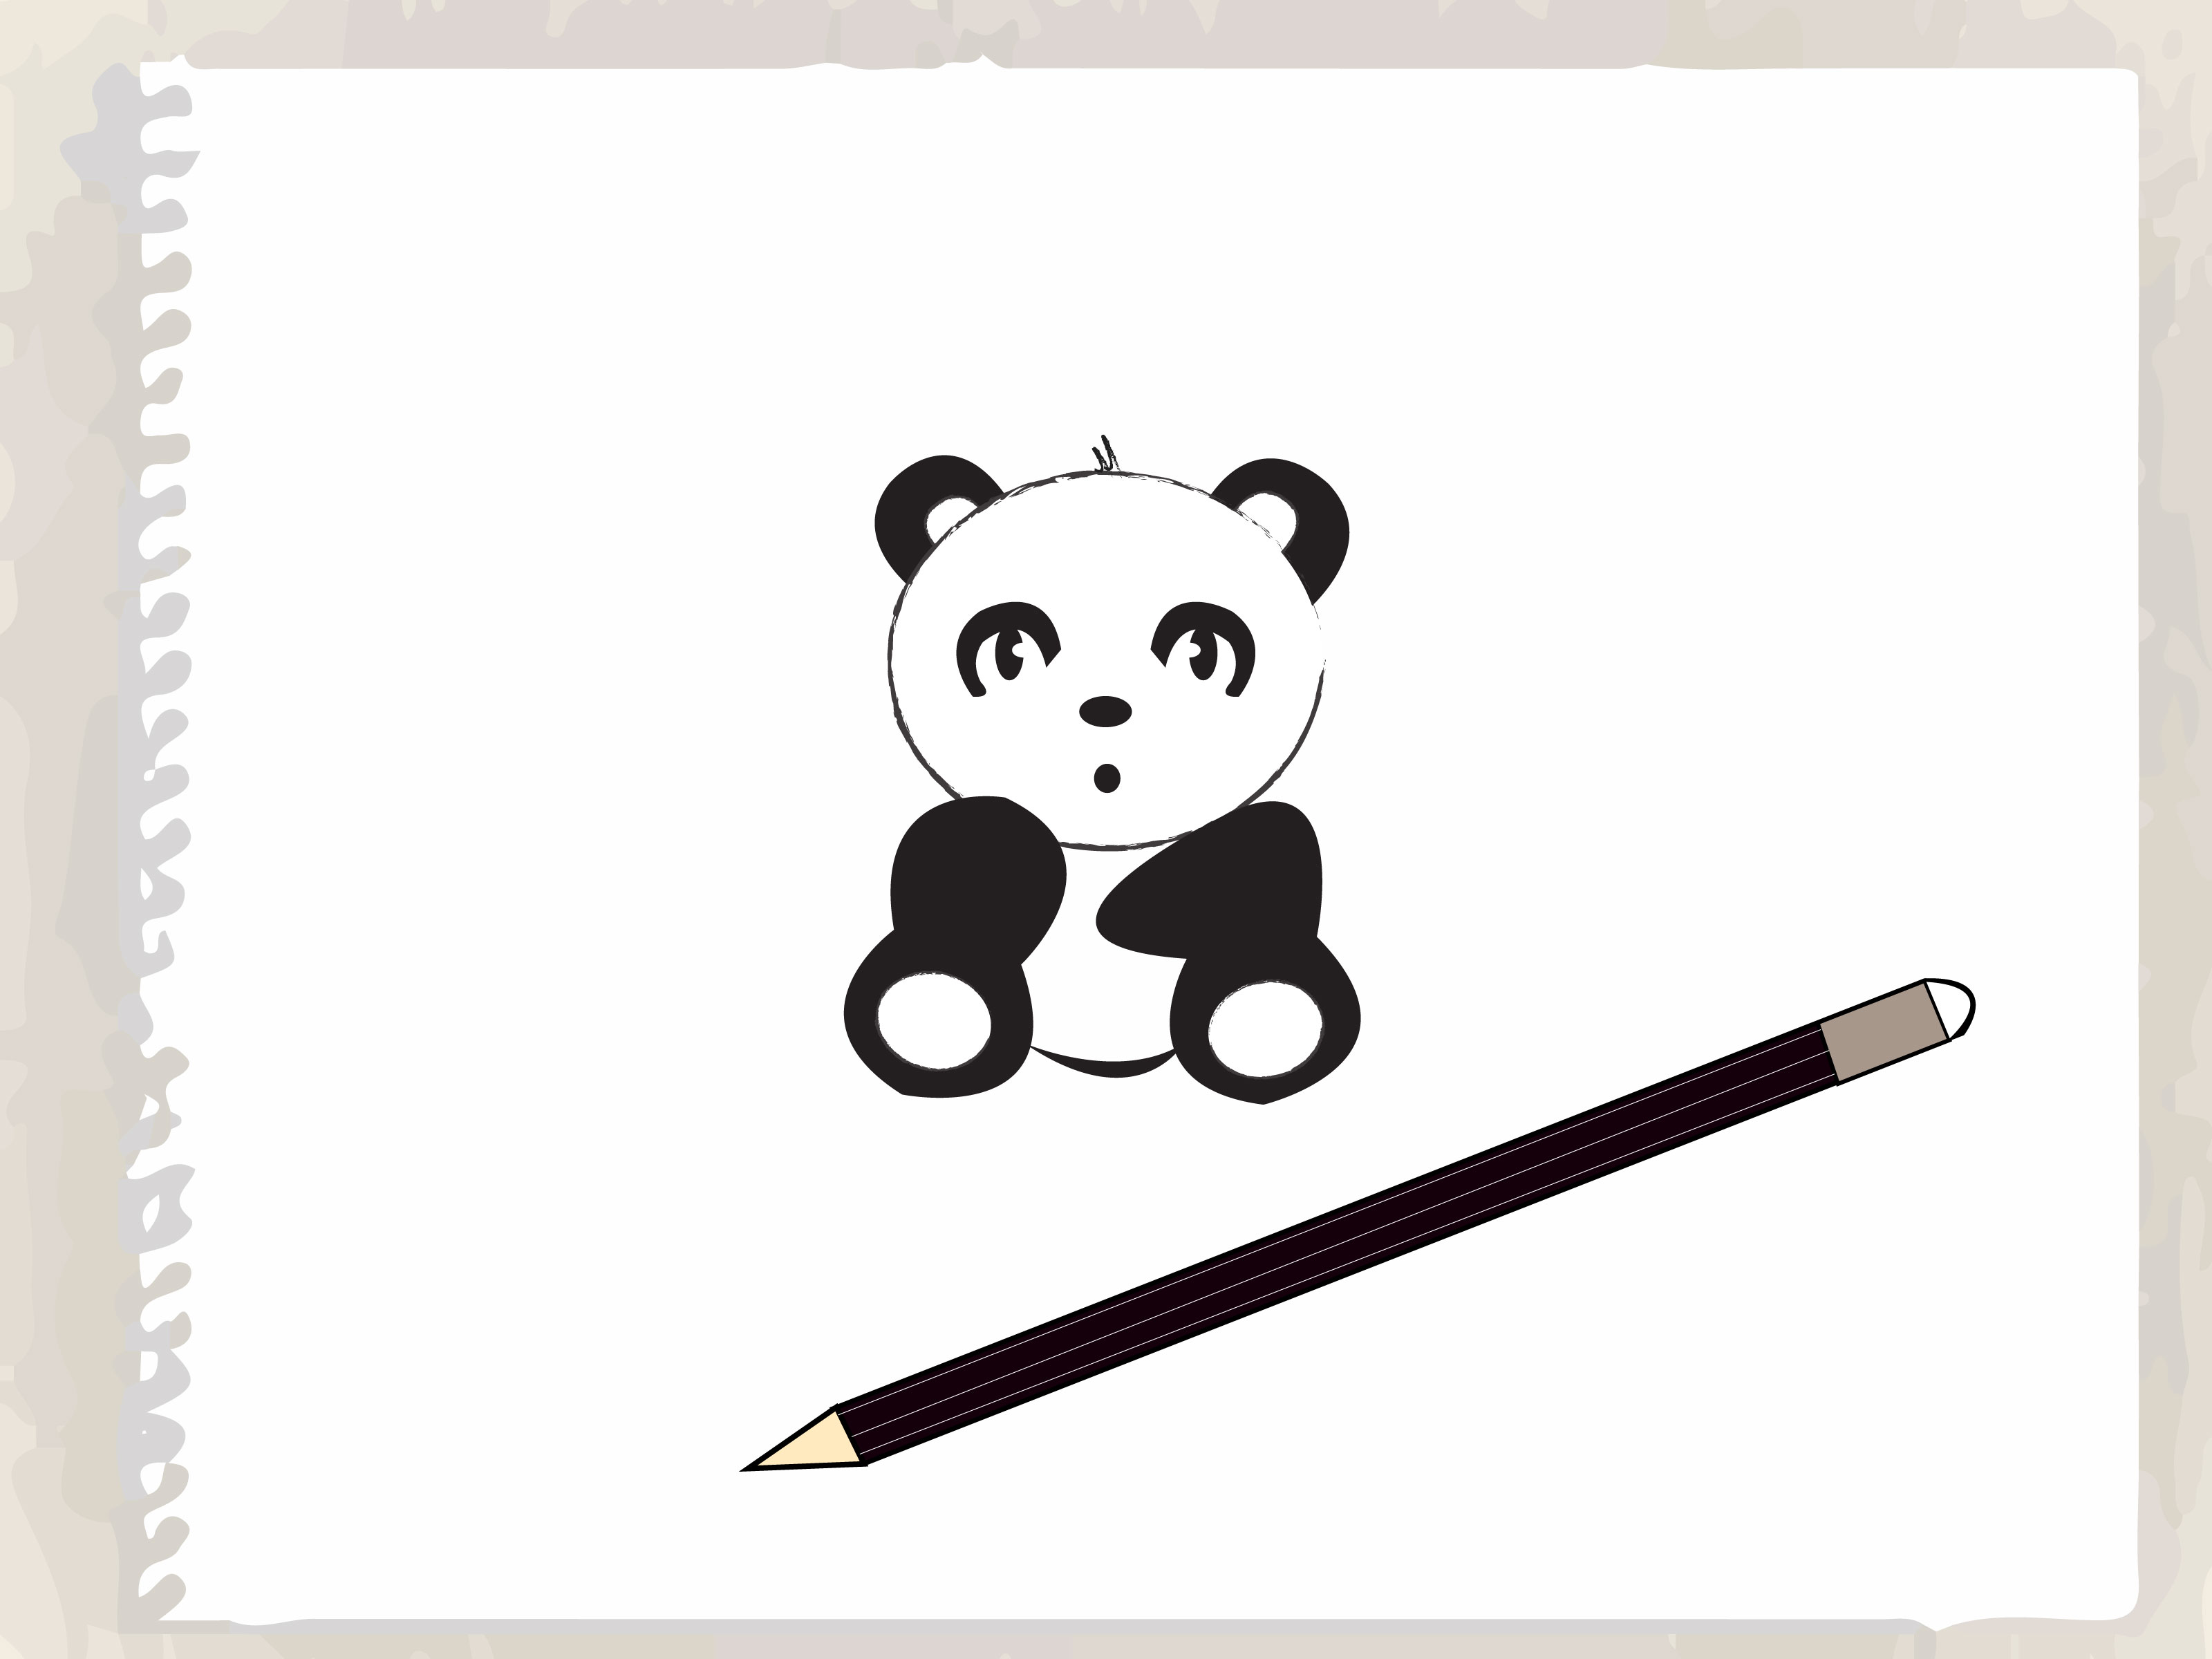 How to Draw a Cartoon Panda: 8 Steps (with Pictures) - wikiHow